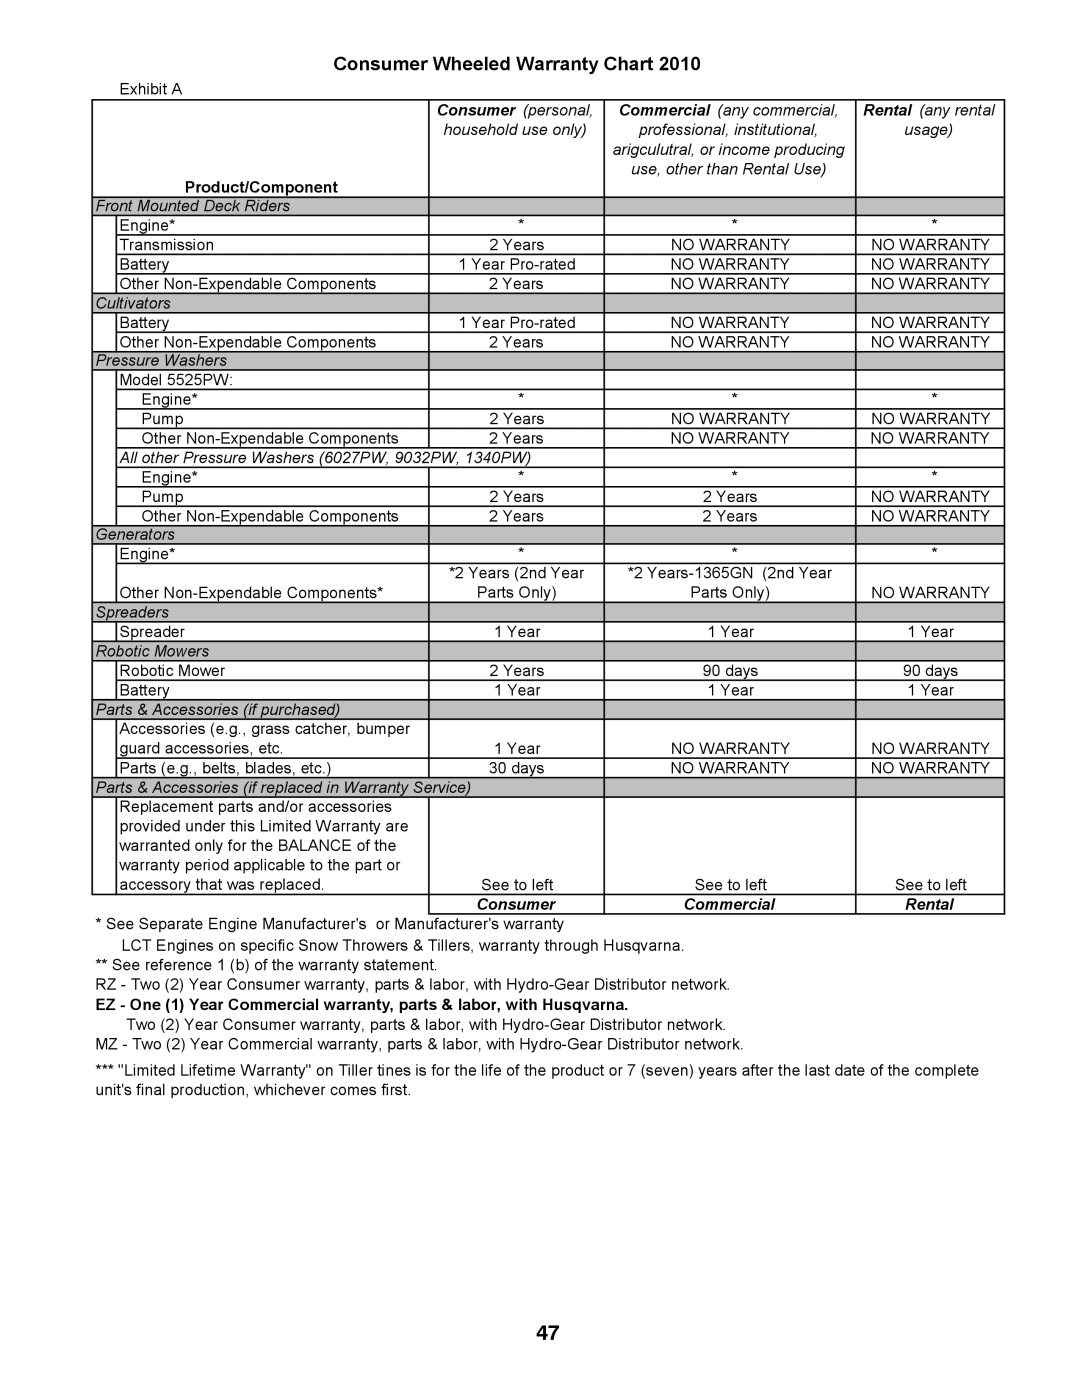 Husqvarna 532 43 86-44, 96045002700 owner manual Consumer Wheeled Warranty Chart, Product/Component, Rental 